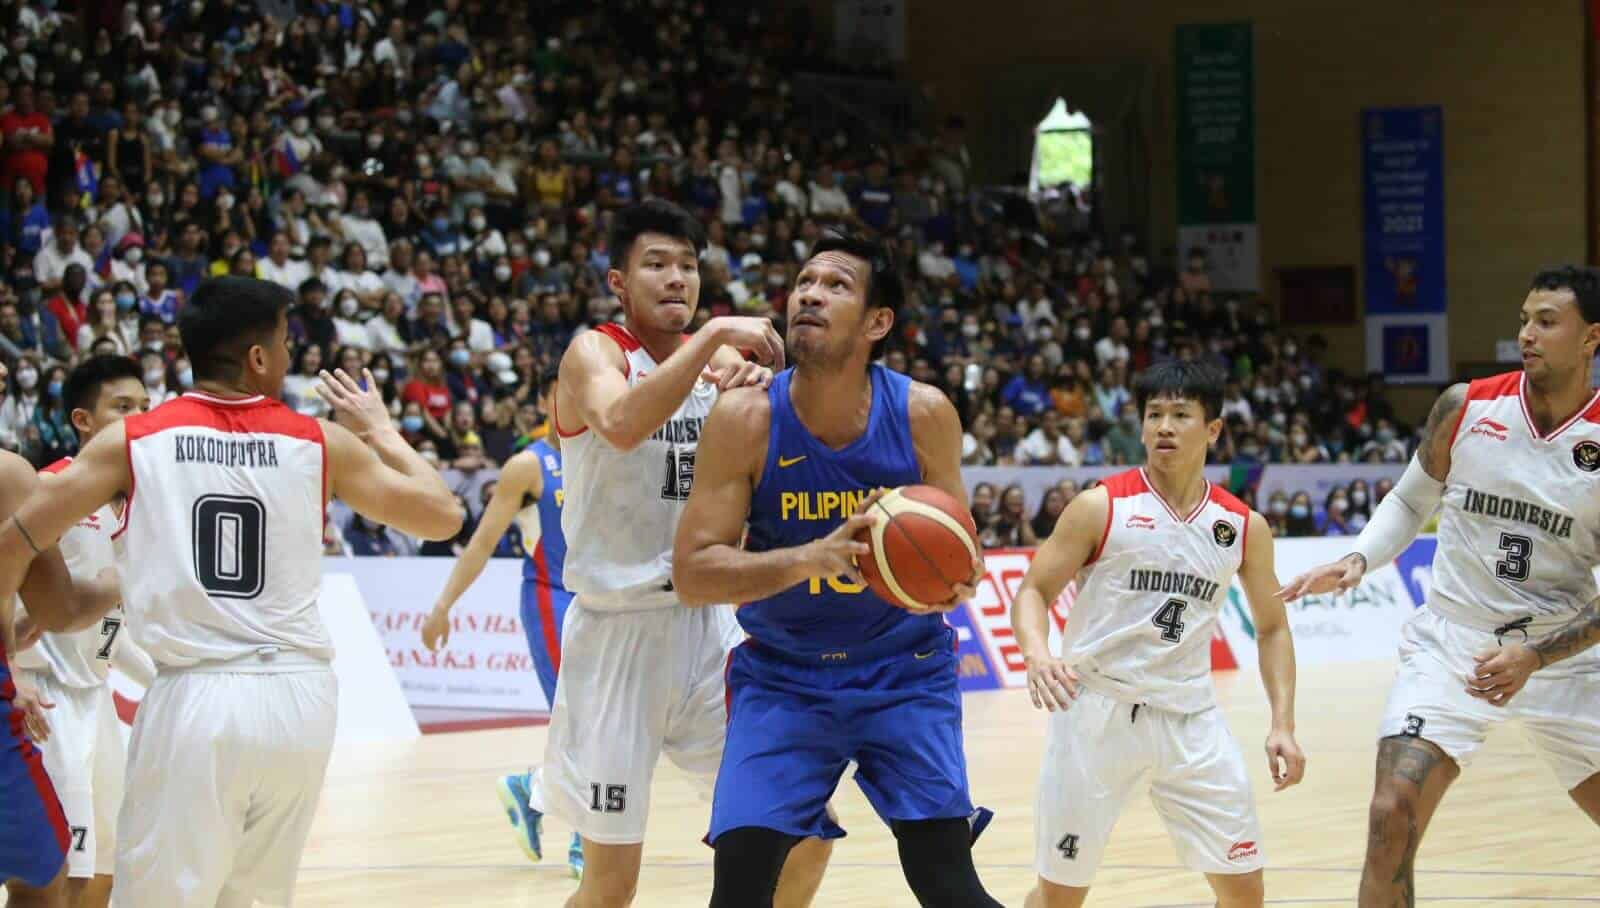 The Gilas team settles for silver in the 31st SEA Games, after a shocking loss to Indonesia, while playing basketball in front of a crowd.